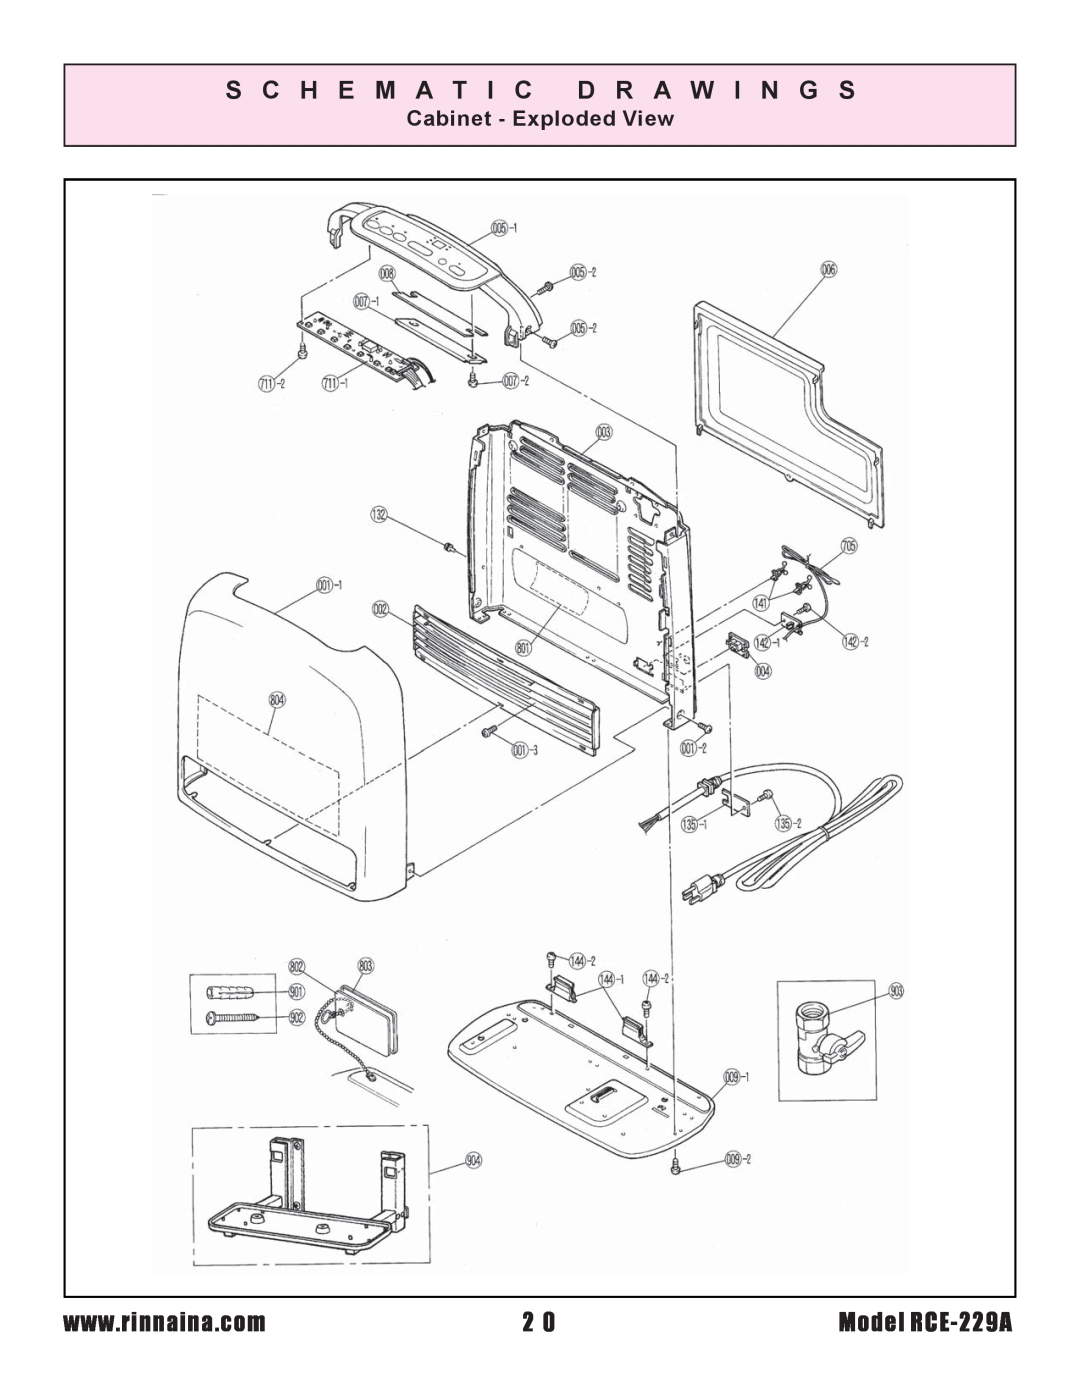 Rinnai installation instructions S C H E M A T I C D R A W I N G S, Model RCE-229A, Cabinet - Exploded View 